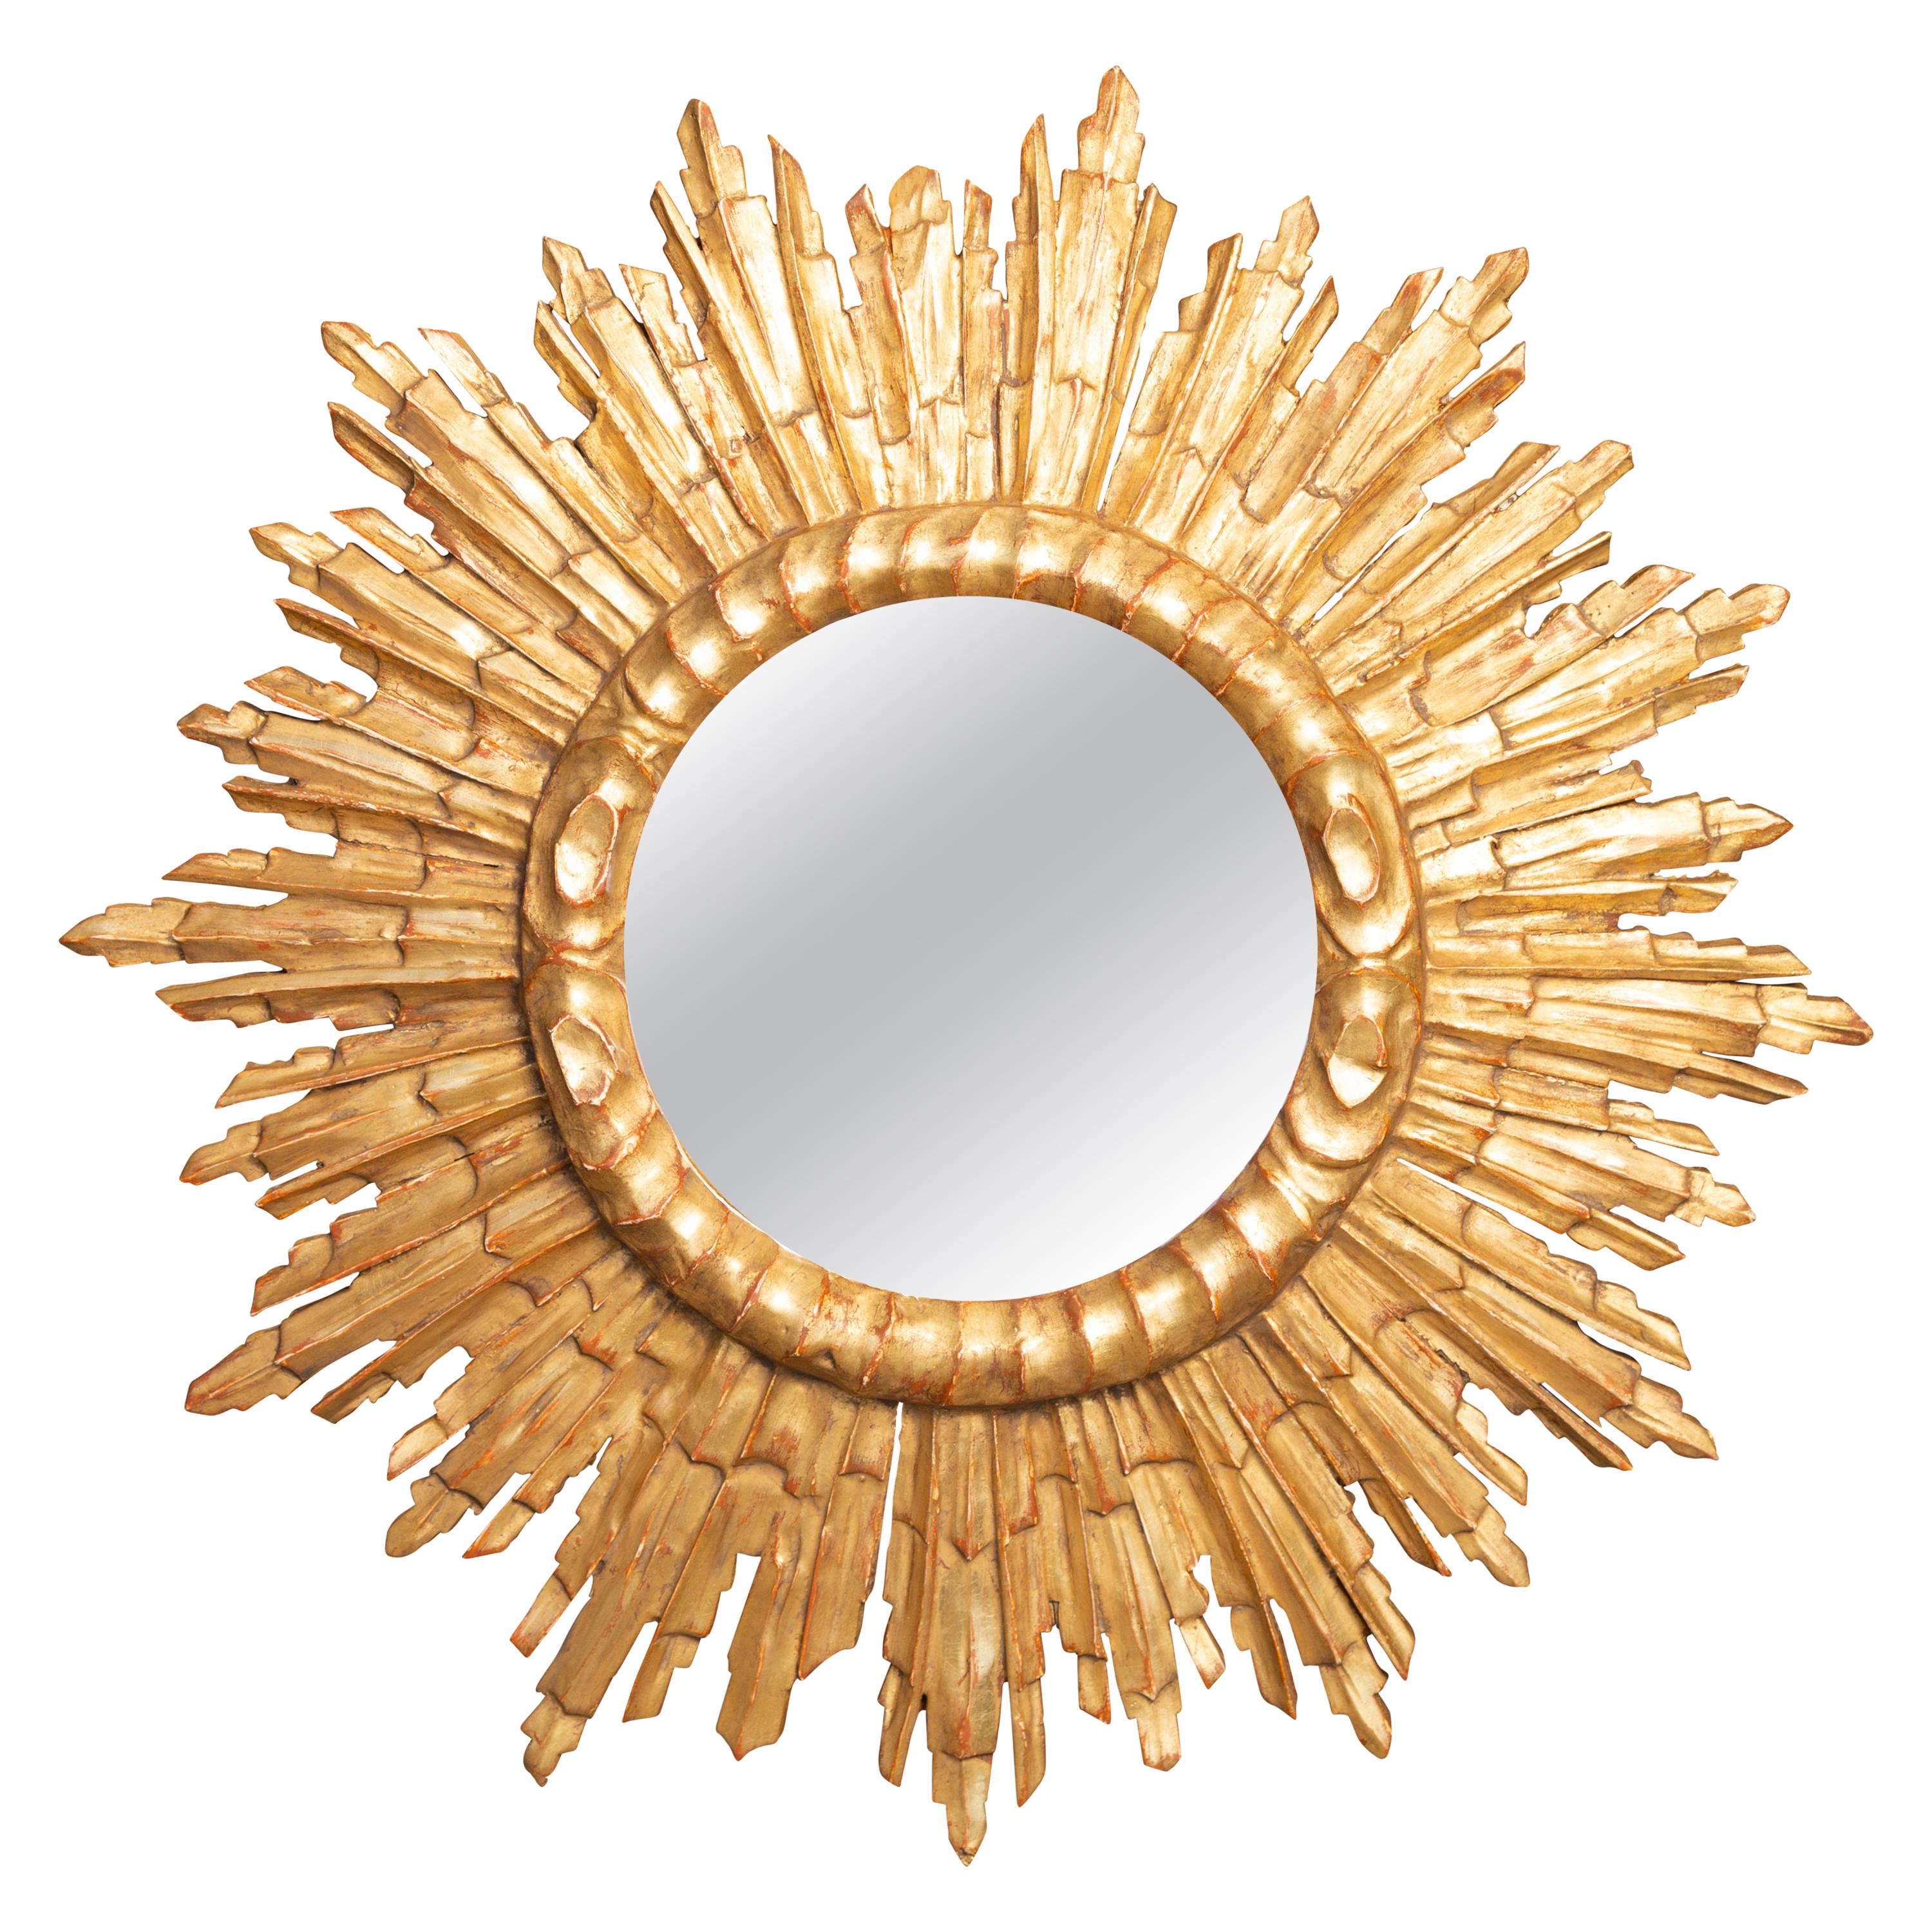 Vintage French Giltwood Sunburst Mirror with Cloudy Frame, circa 1950